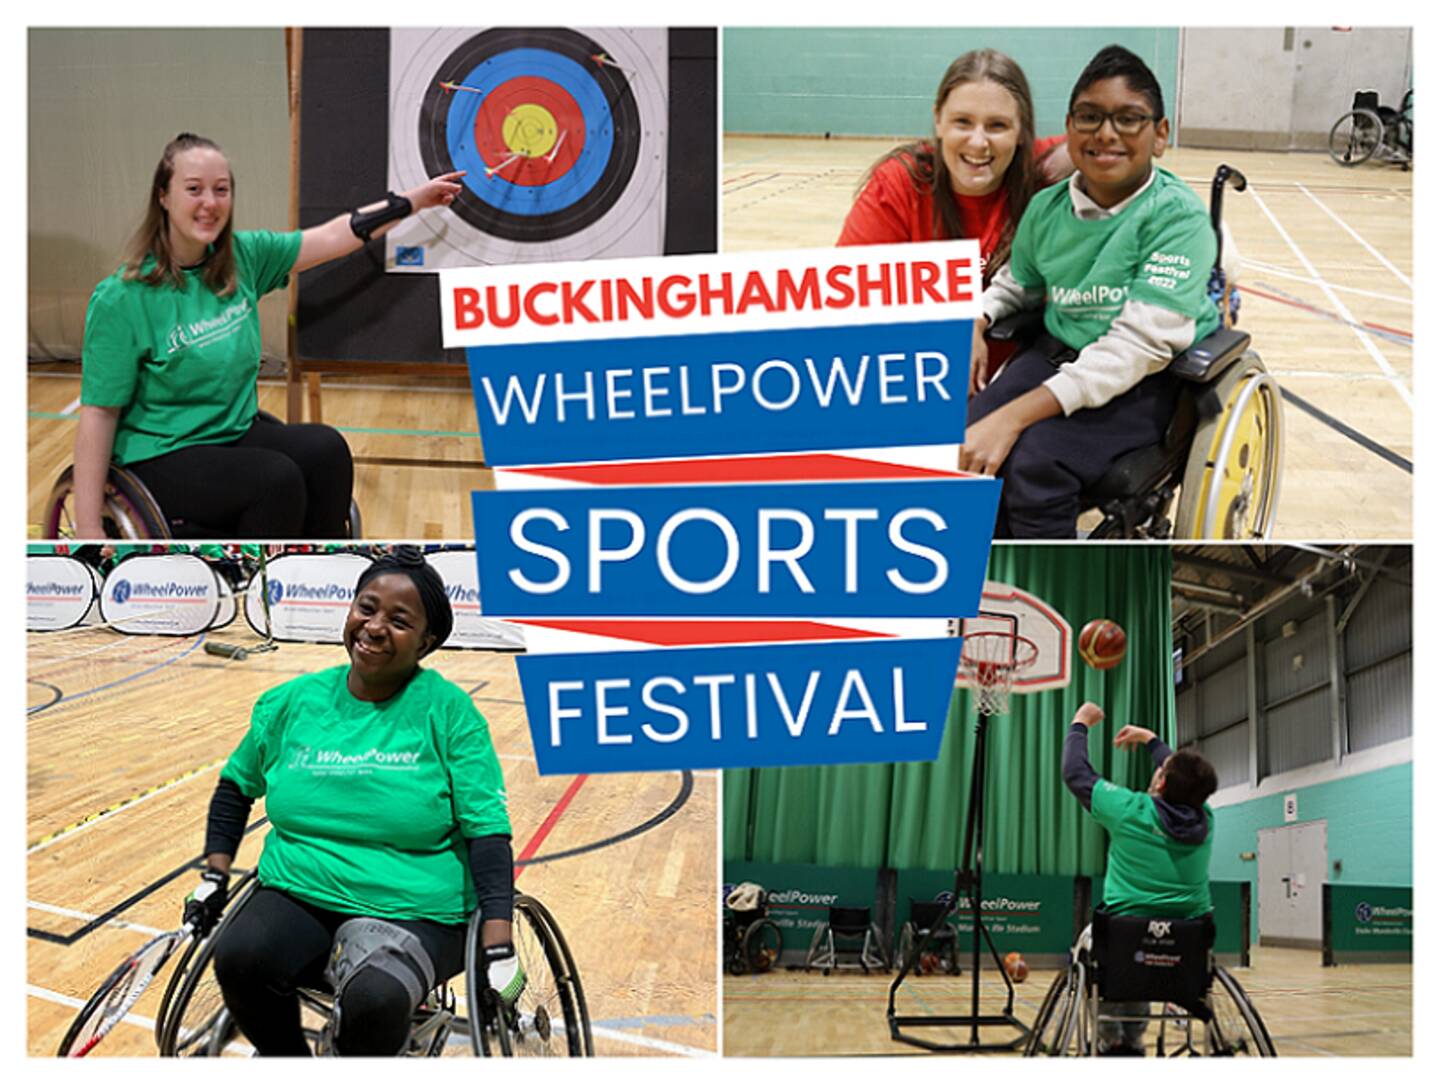 Collage image shows people taking part in activities at WheelPower Sports Festival Buckinghamshire 2022